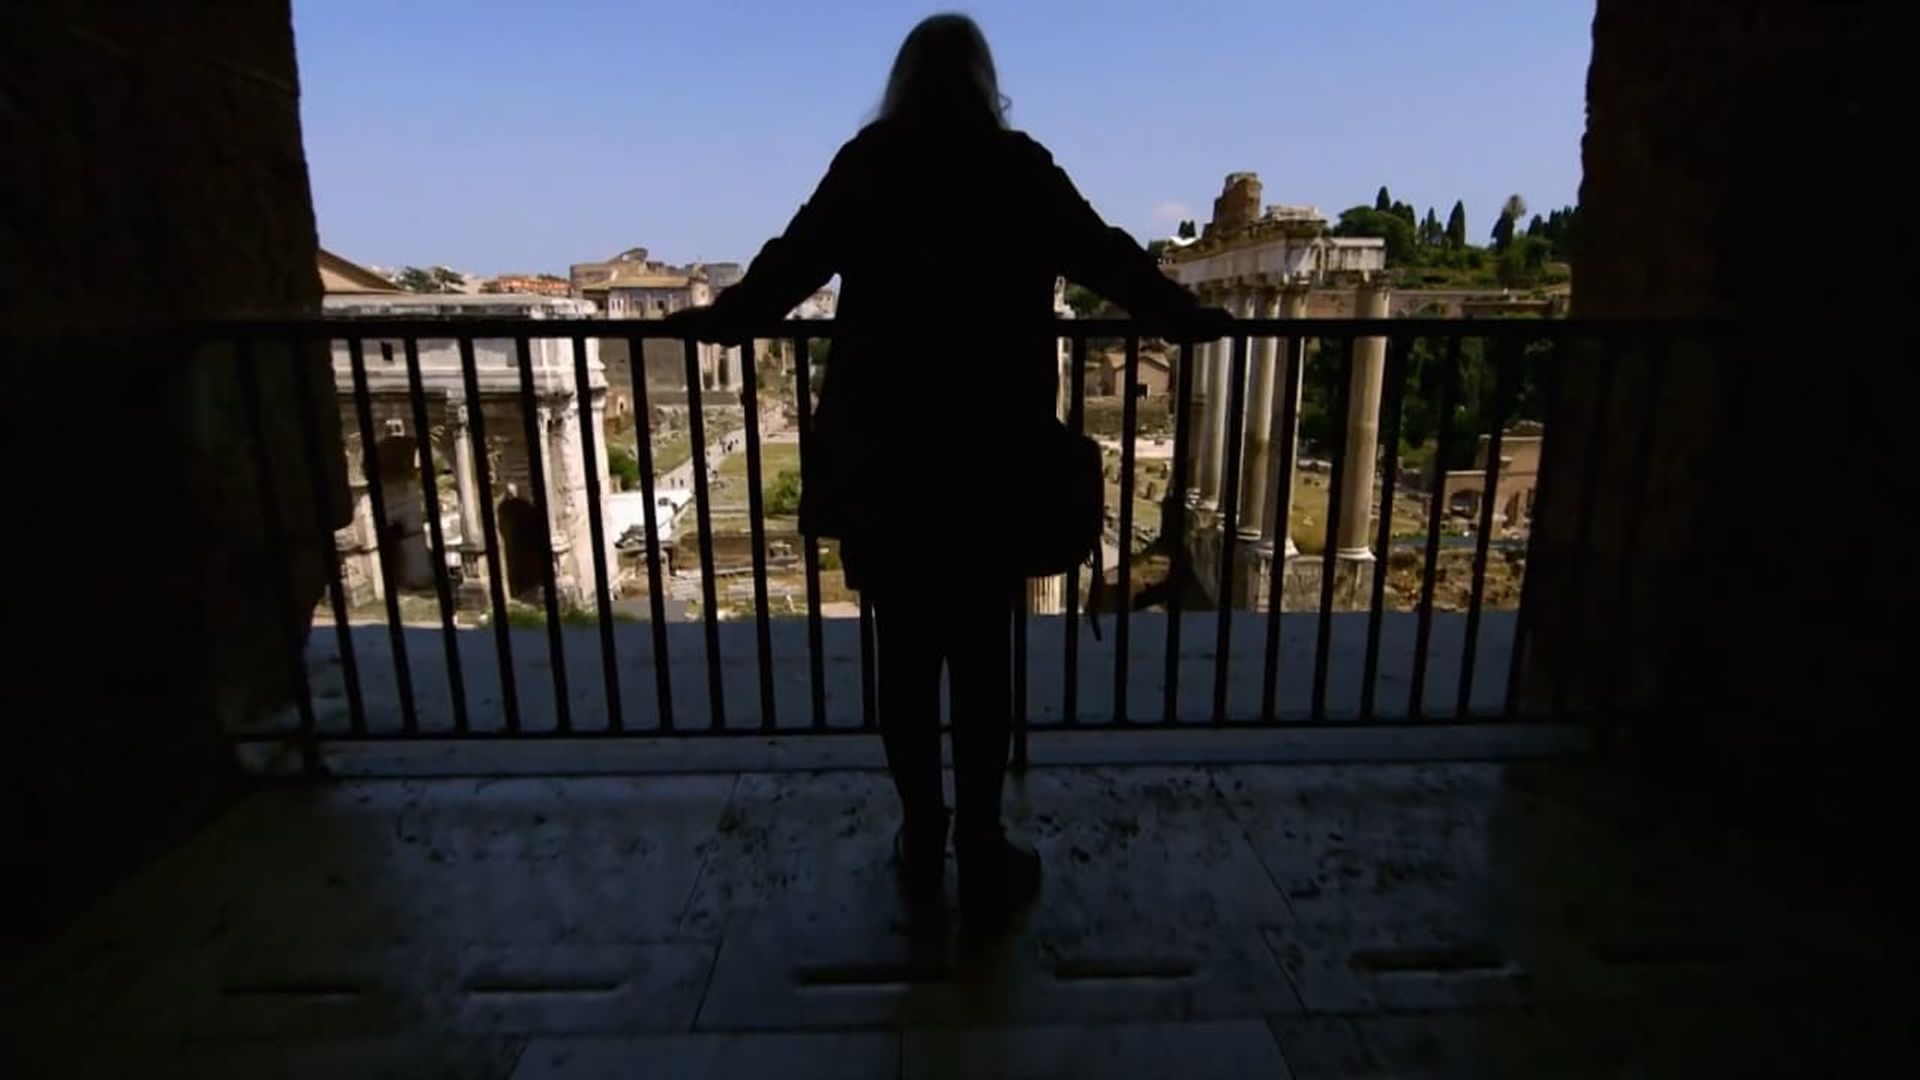 Mary Beard's Ultimate Rome: Empire Without Limit background